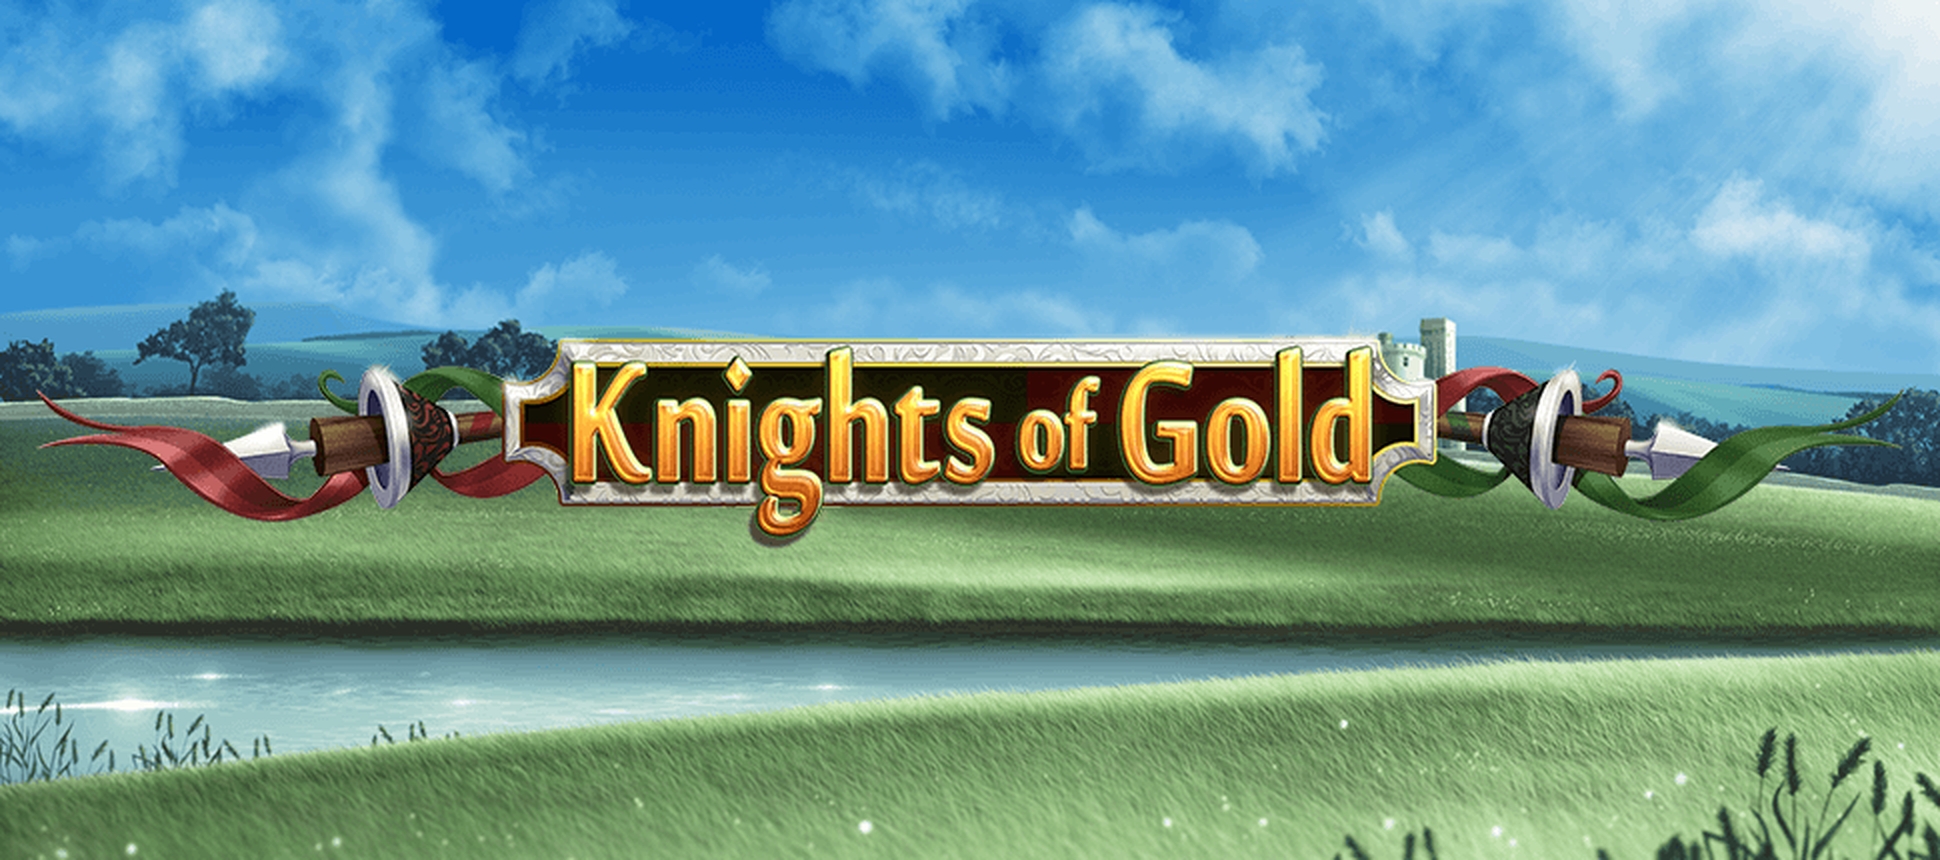 The Knights of Gold Online Slot Demo Game by Betdigital